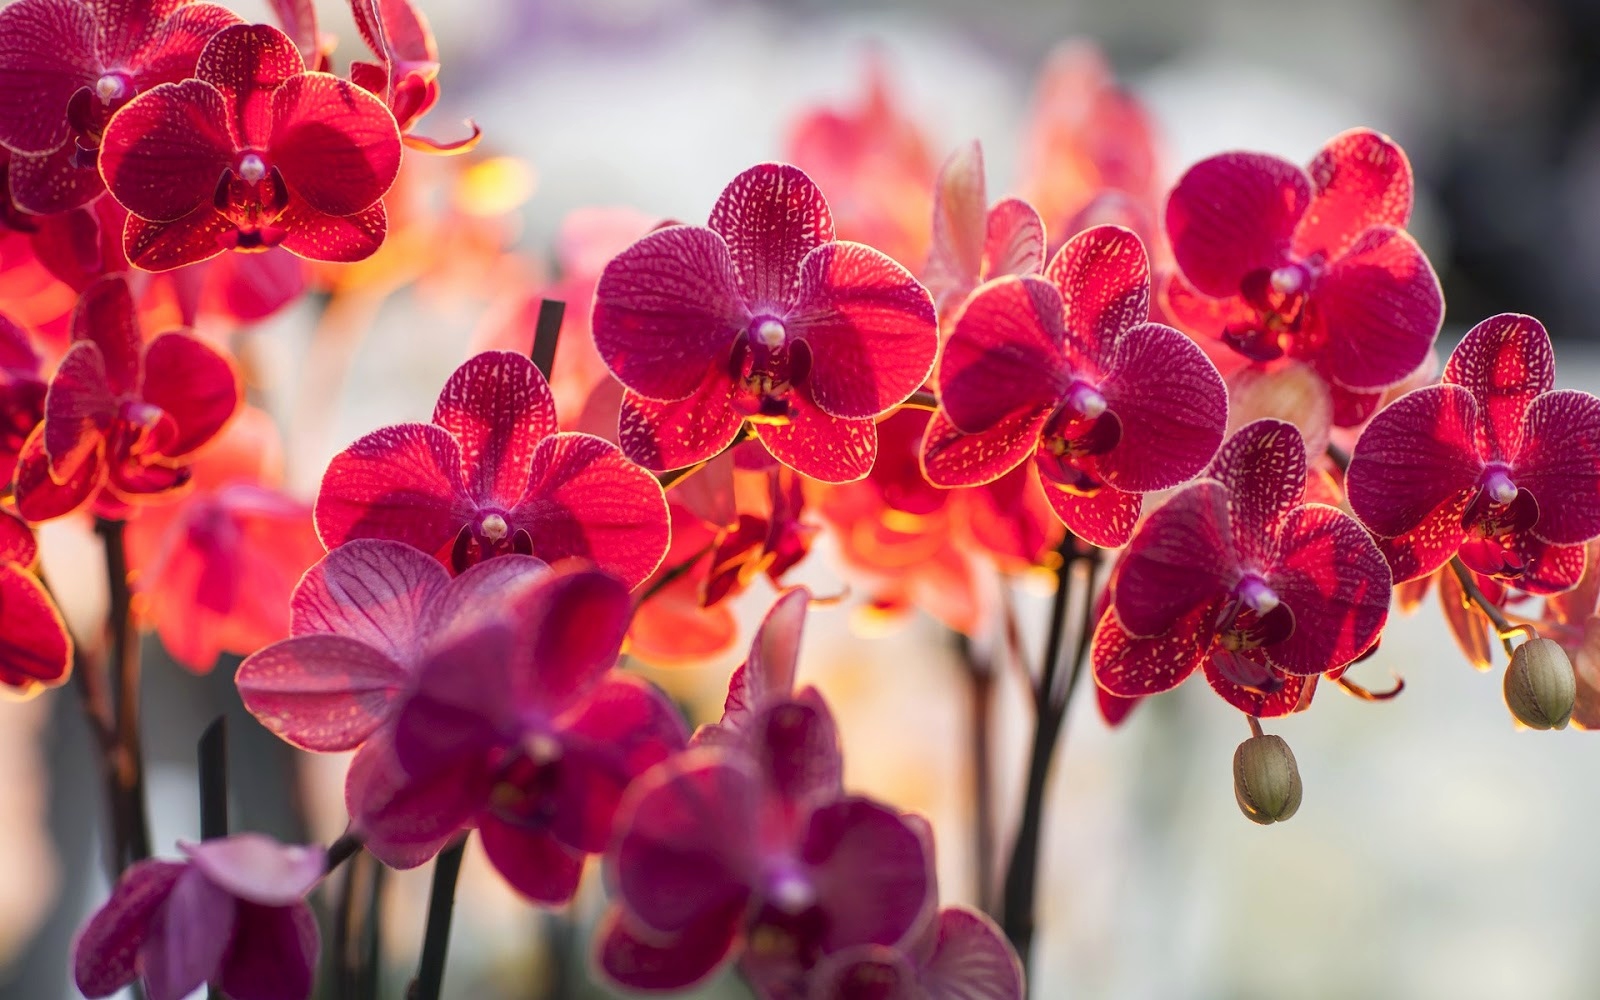 Orchid Images Of Flowers Hd , HD Wallpaper & Backgrounds